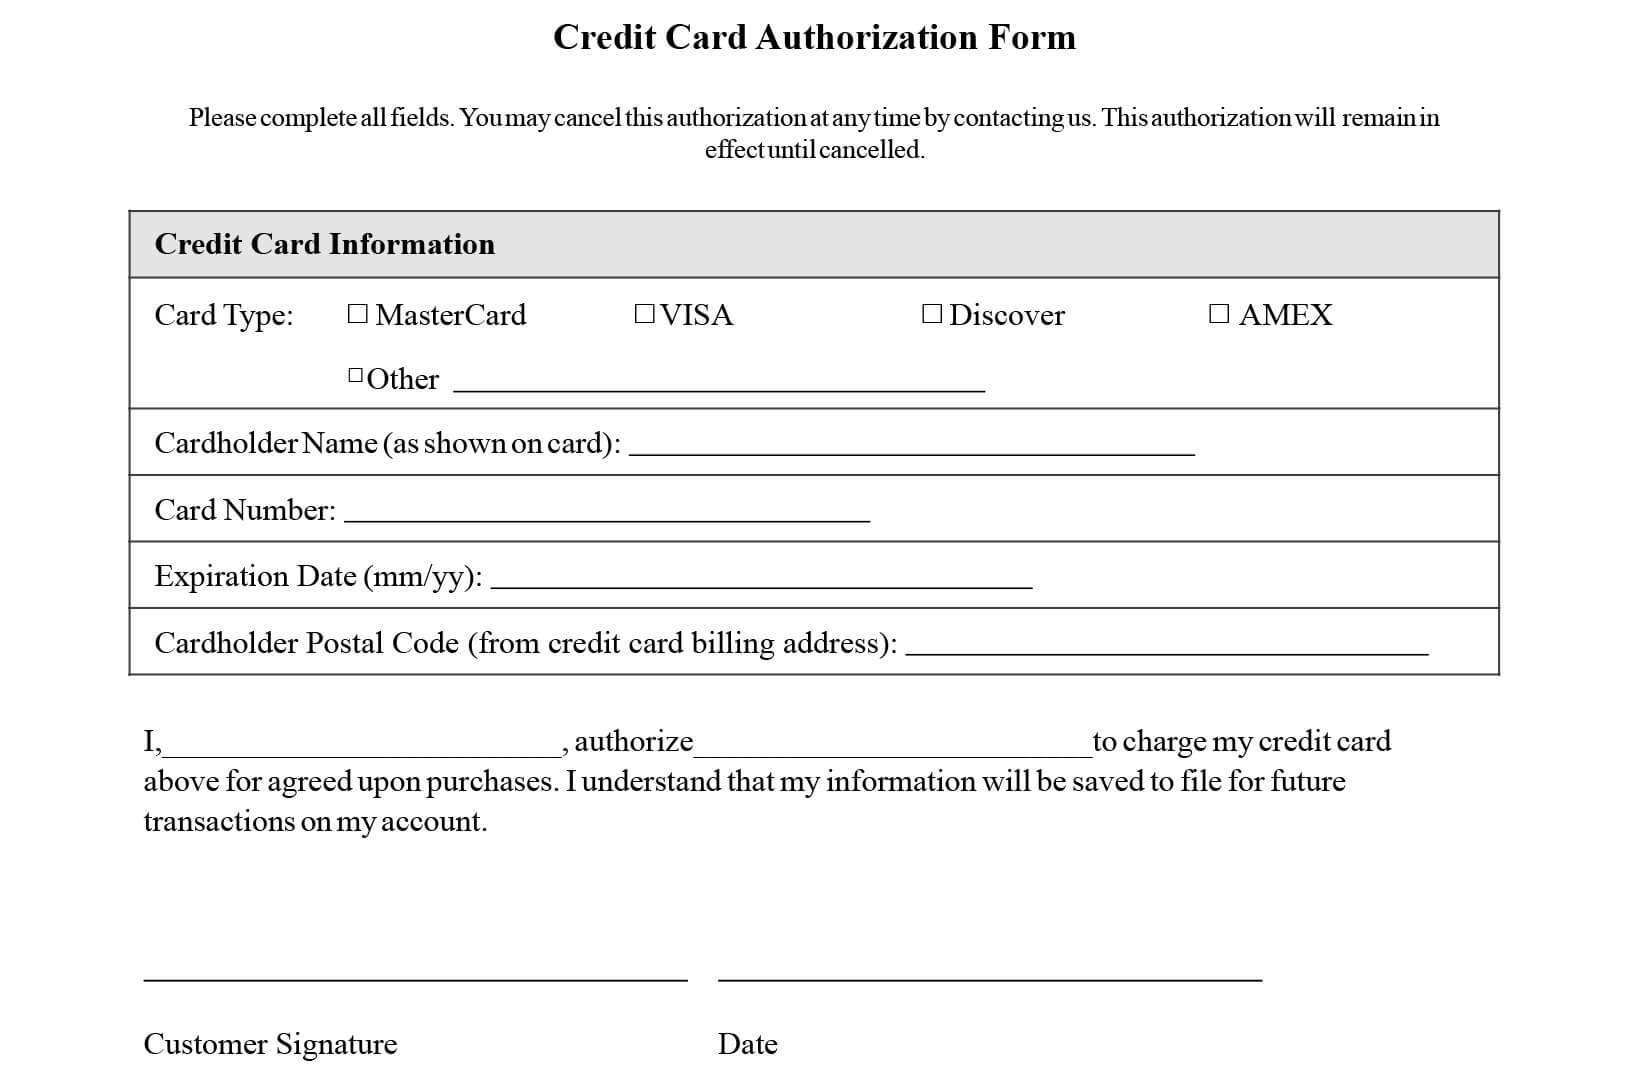 Credit Card Authorization Form Templates [Download] In Hotel Credit Card Authorization Form Template